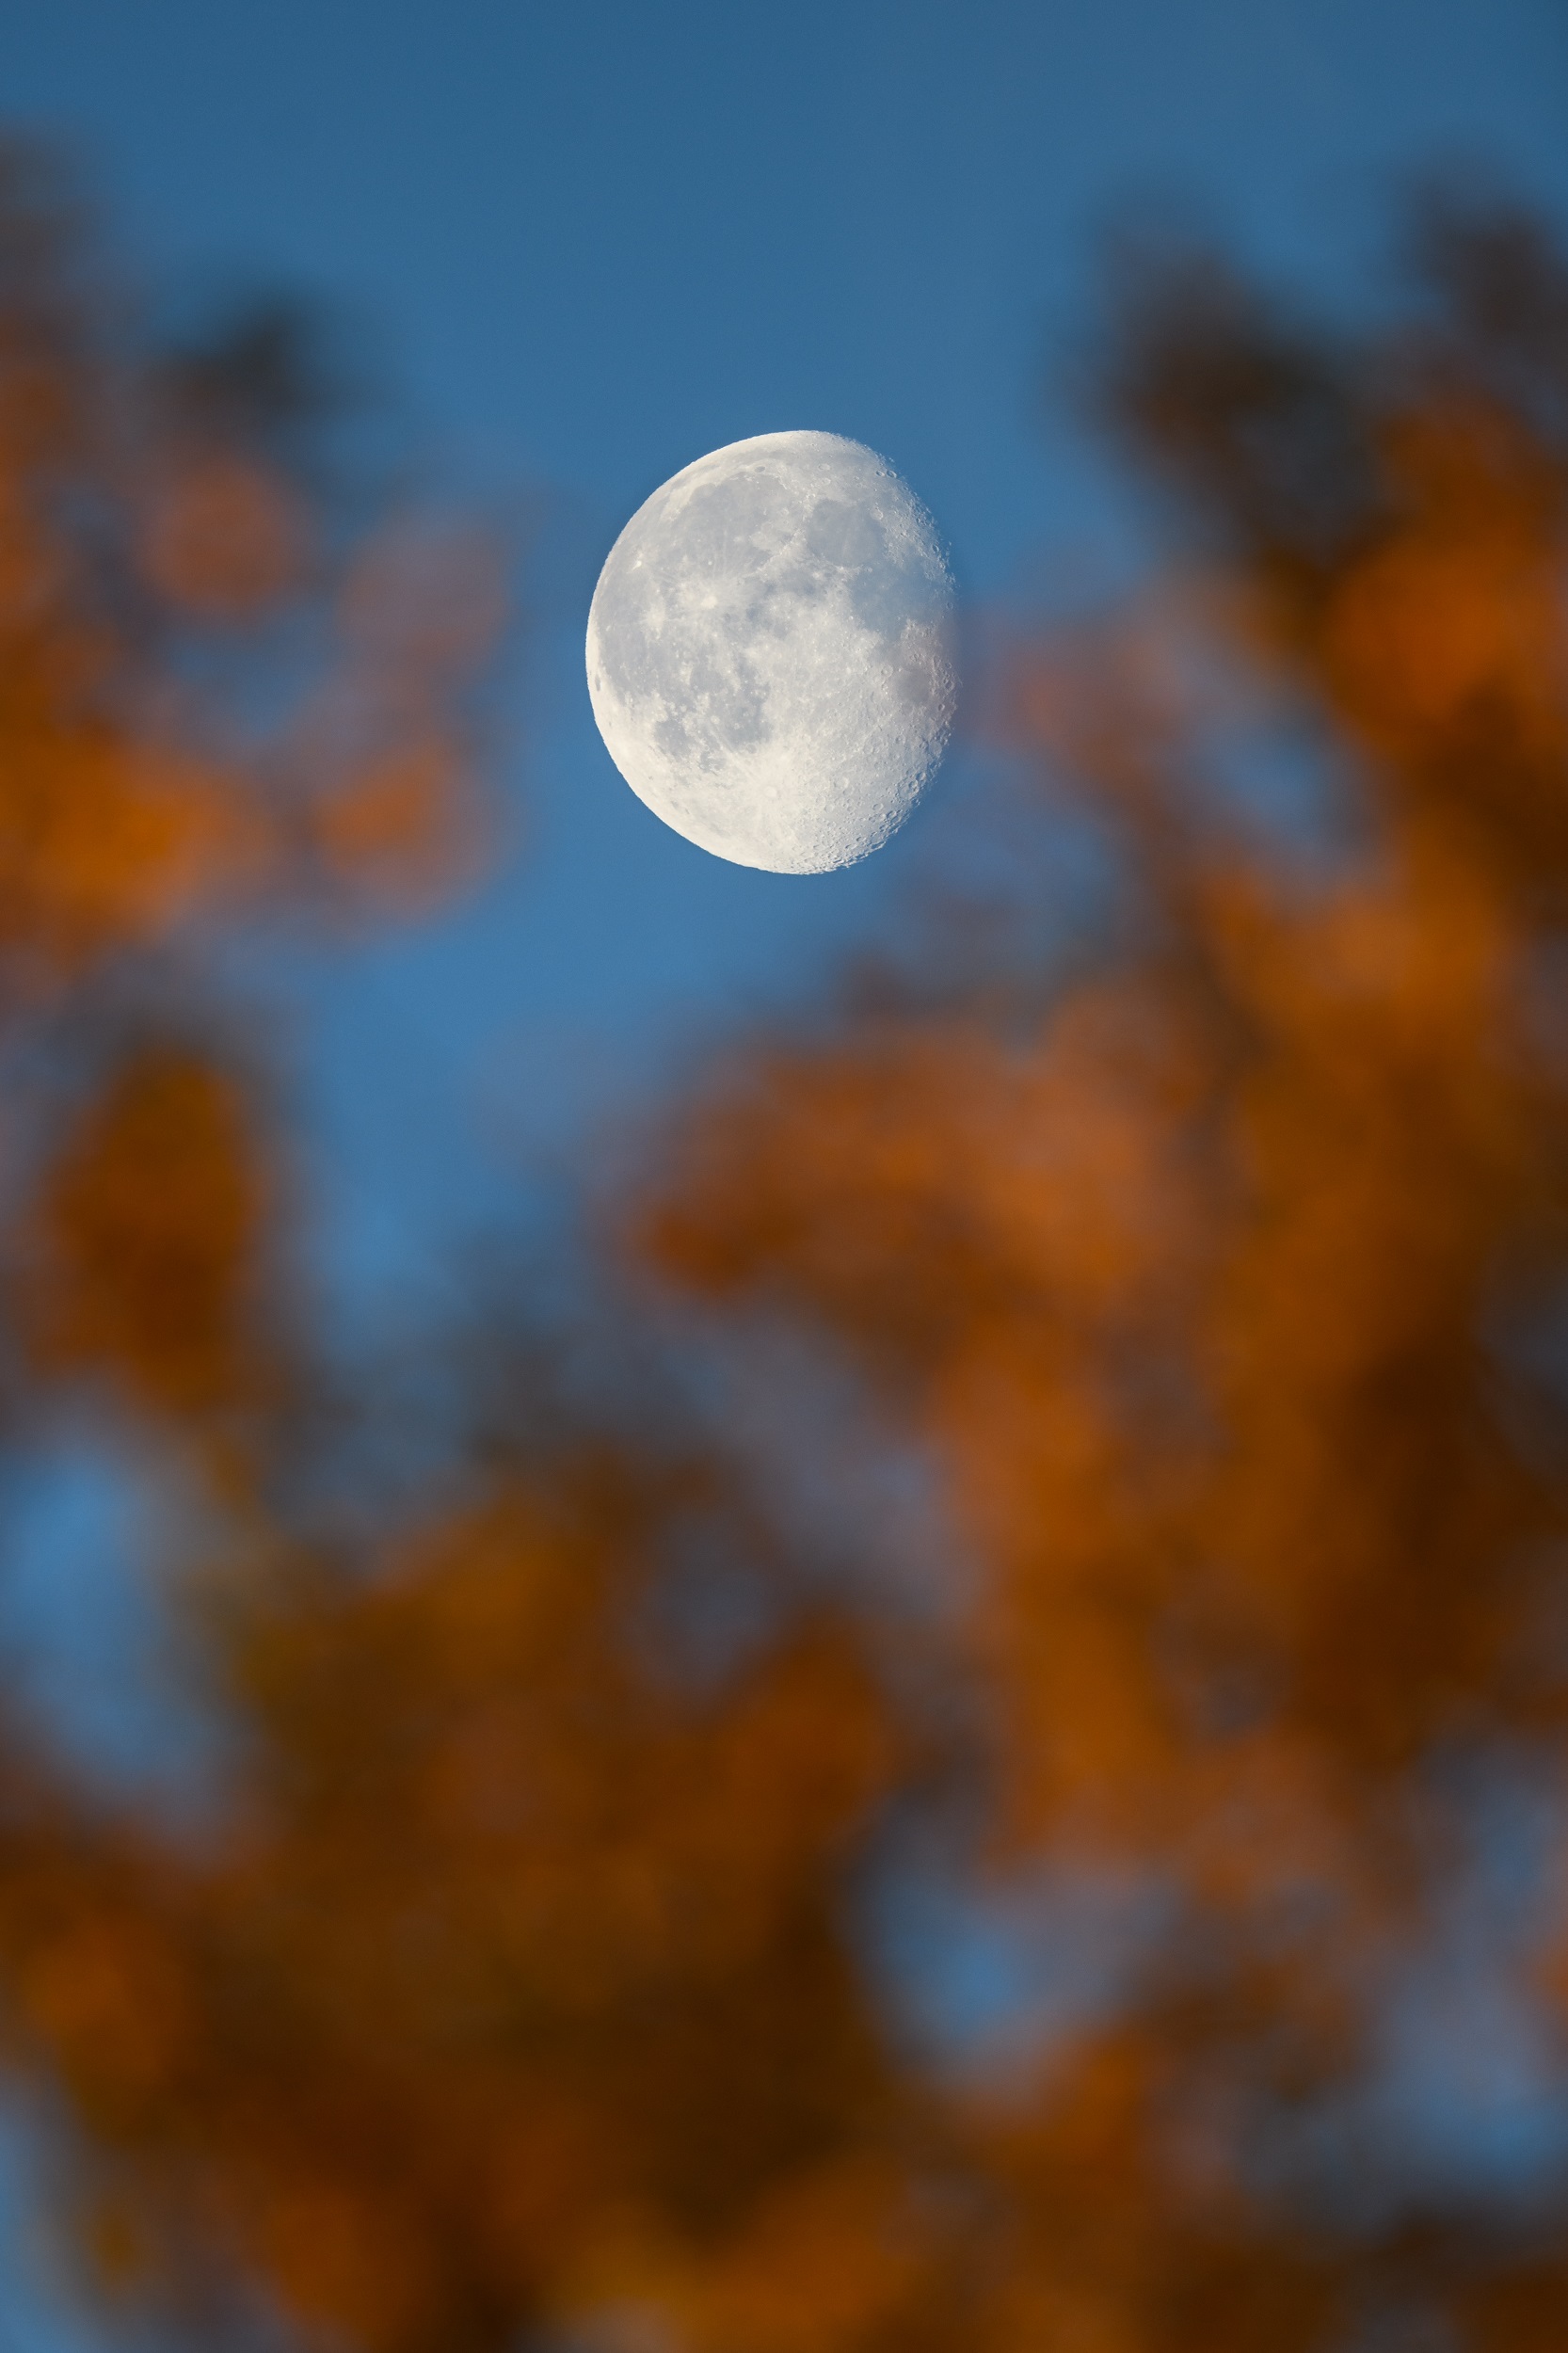 a photo of a 80% full waning moon above some out-of-focus fall leaves bathed in sunrise light